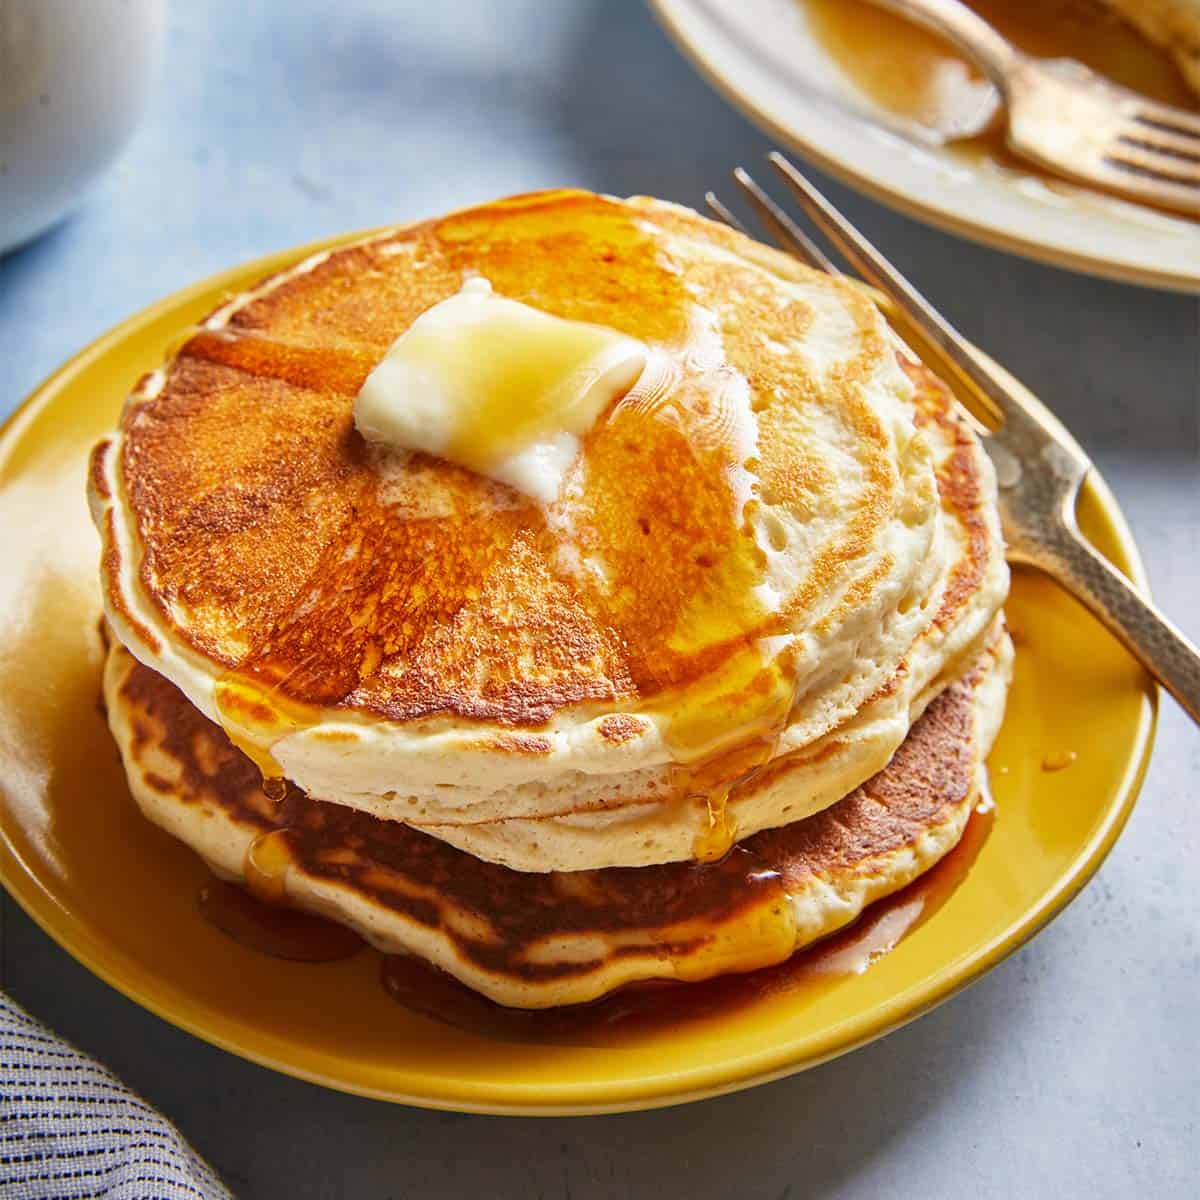 How to Make Pancakes from Scratch: A Step-by-Step Guide